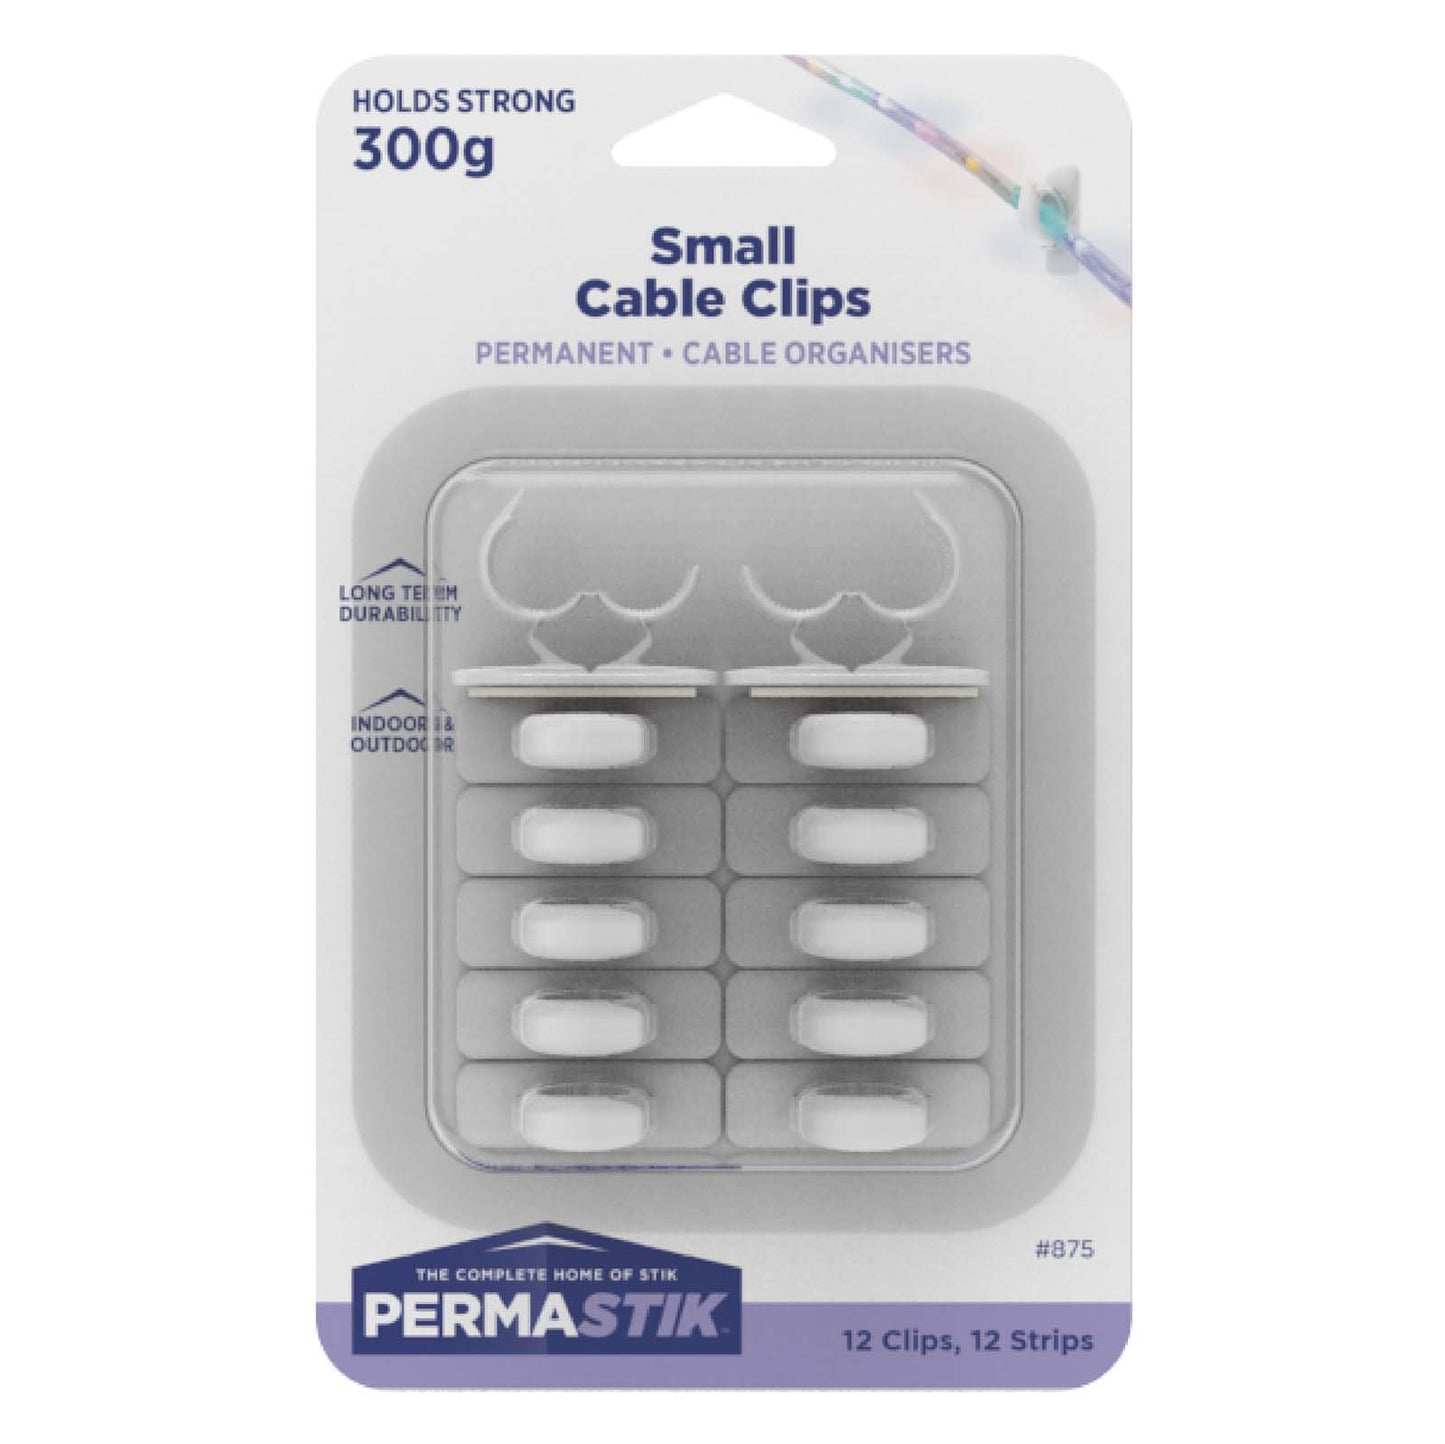 Small Permanent Cable Clips - 12 Pack